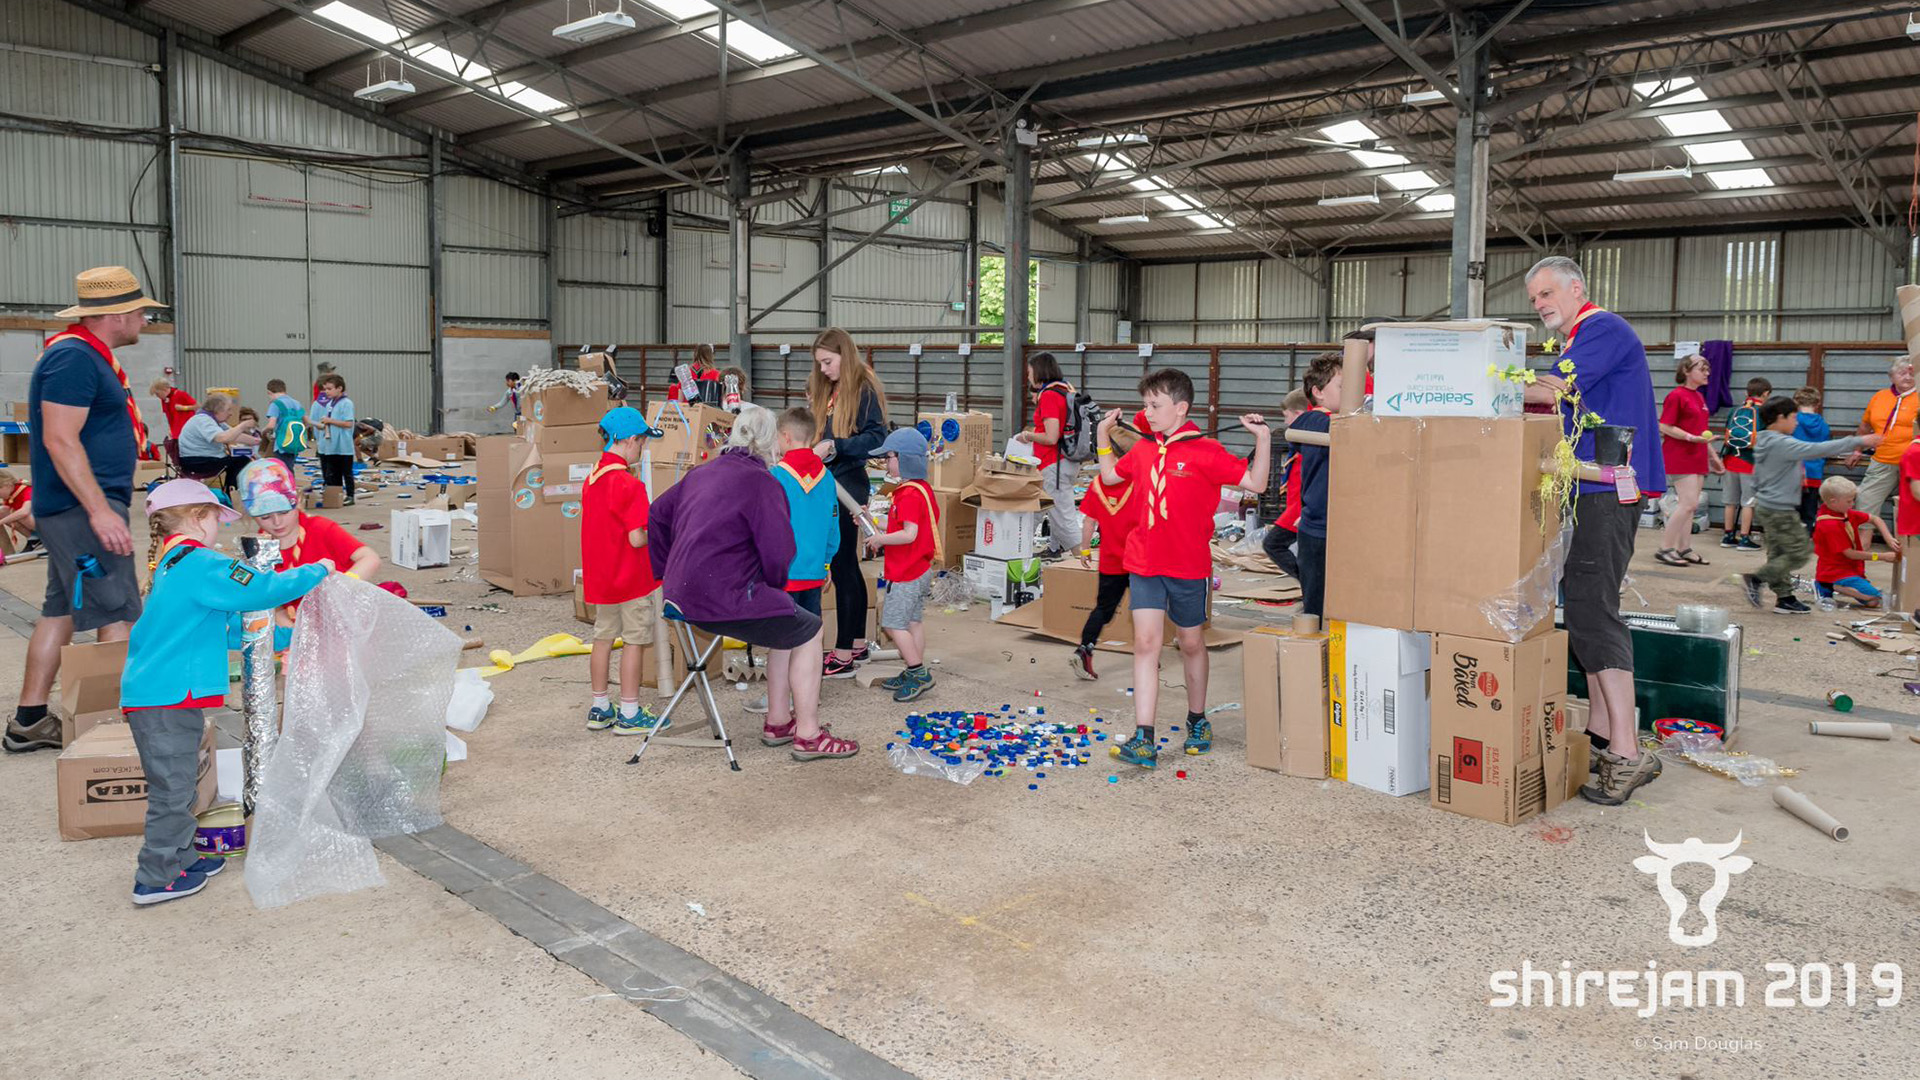 Image of scouts doing various arts and crafts at Shirejam 2019